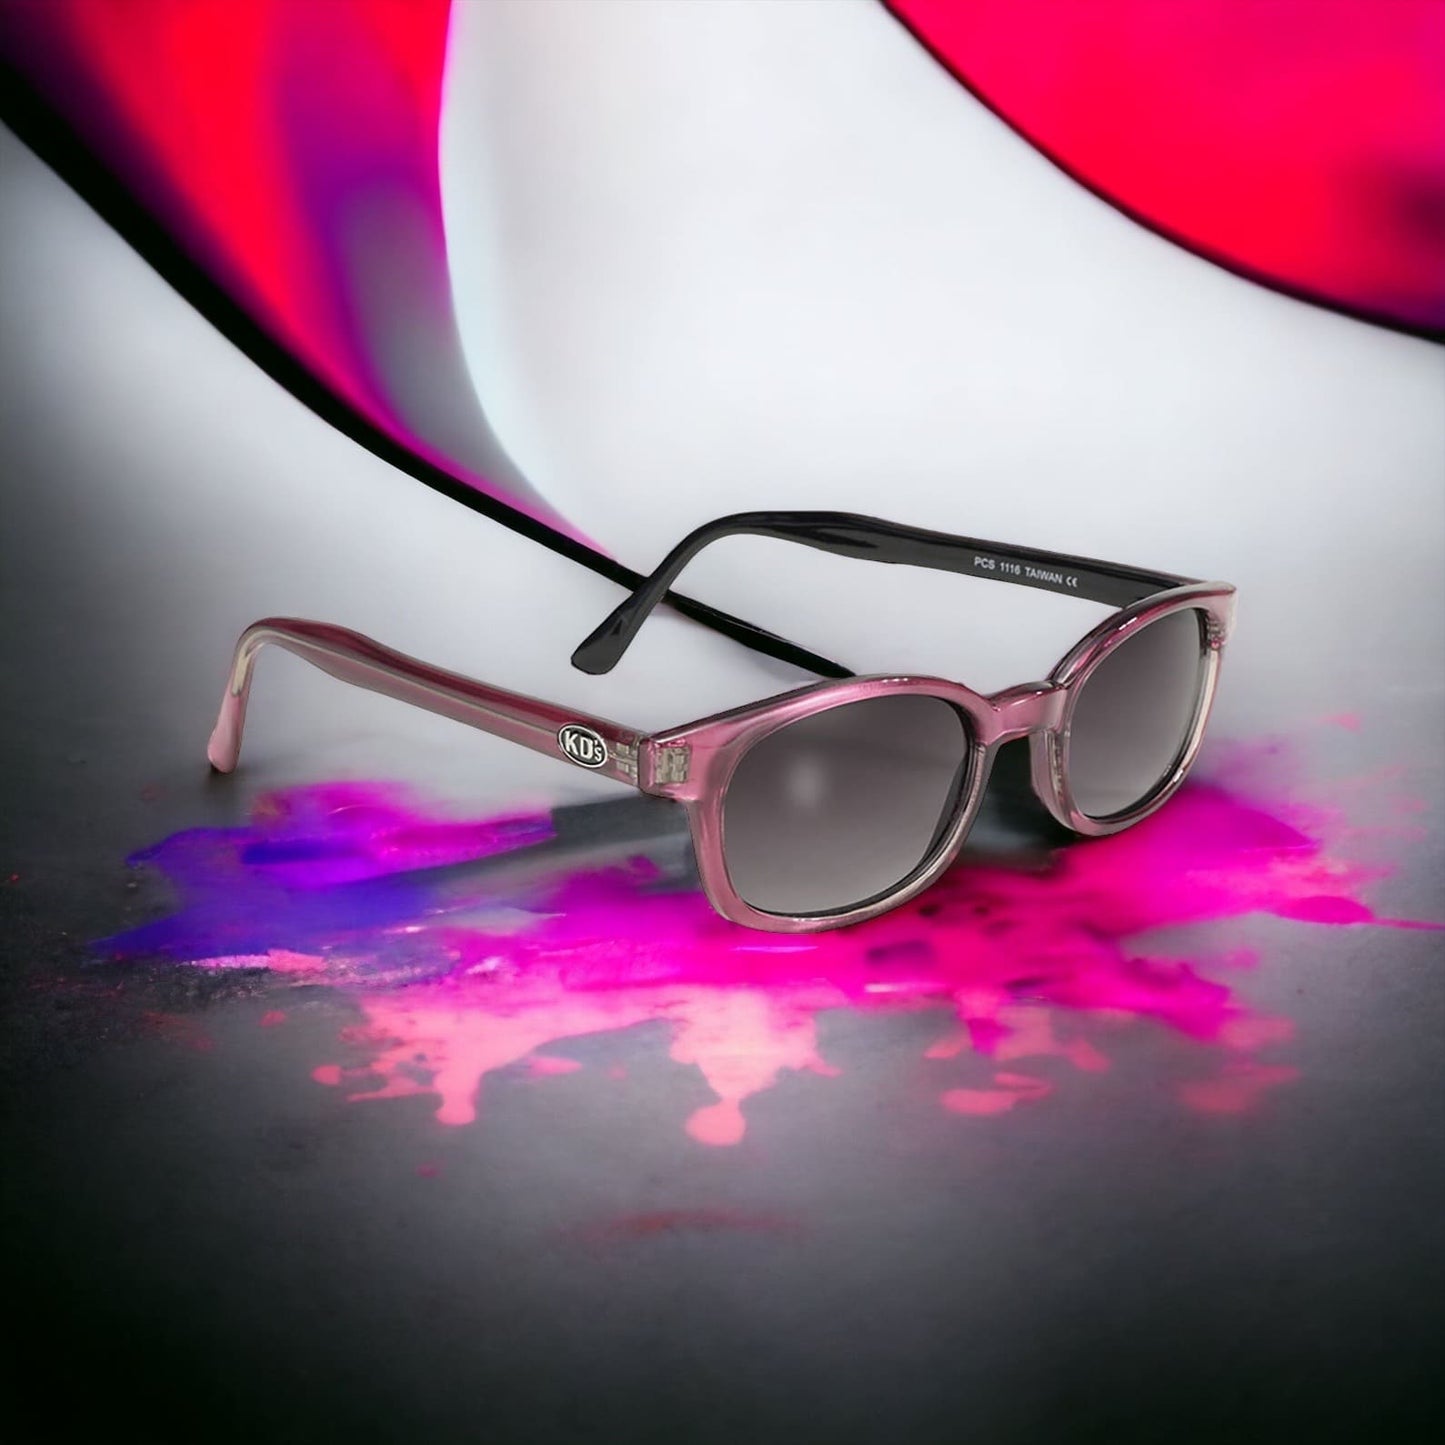 The X-KD's 1116 sunglasses with grey lenses and an elegant pink frame in a decor with paint